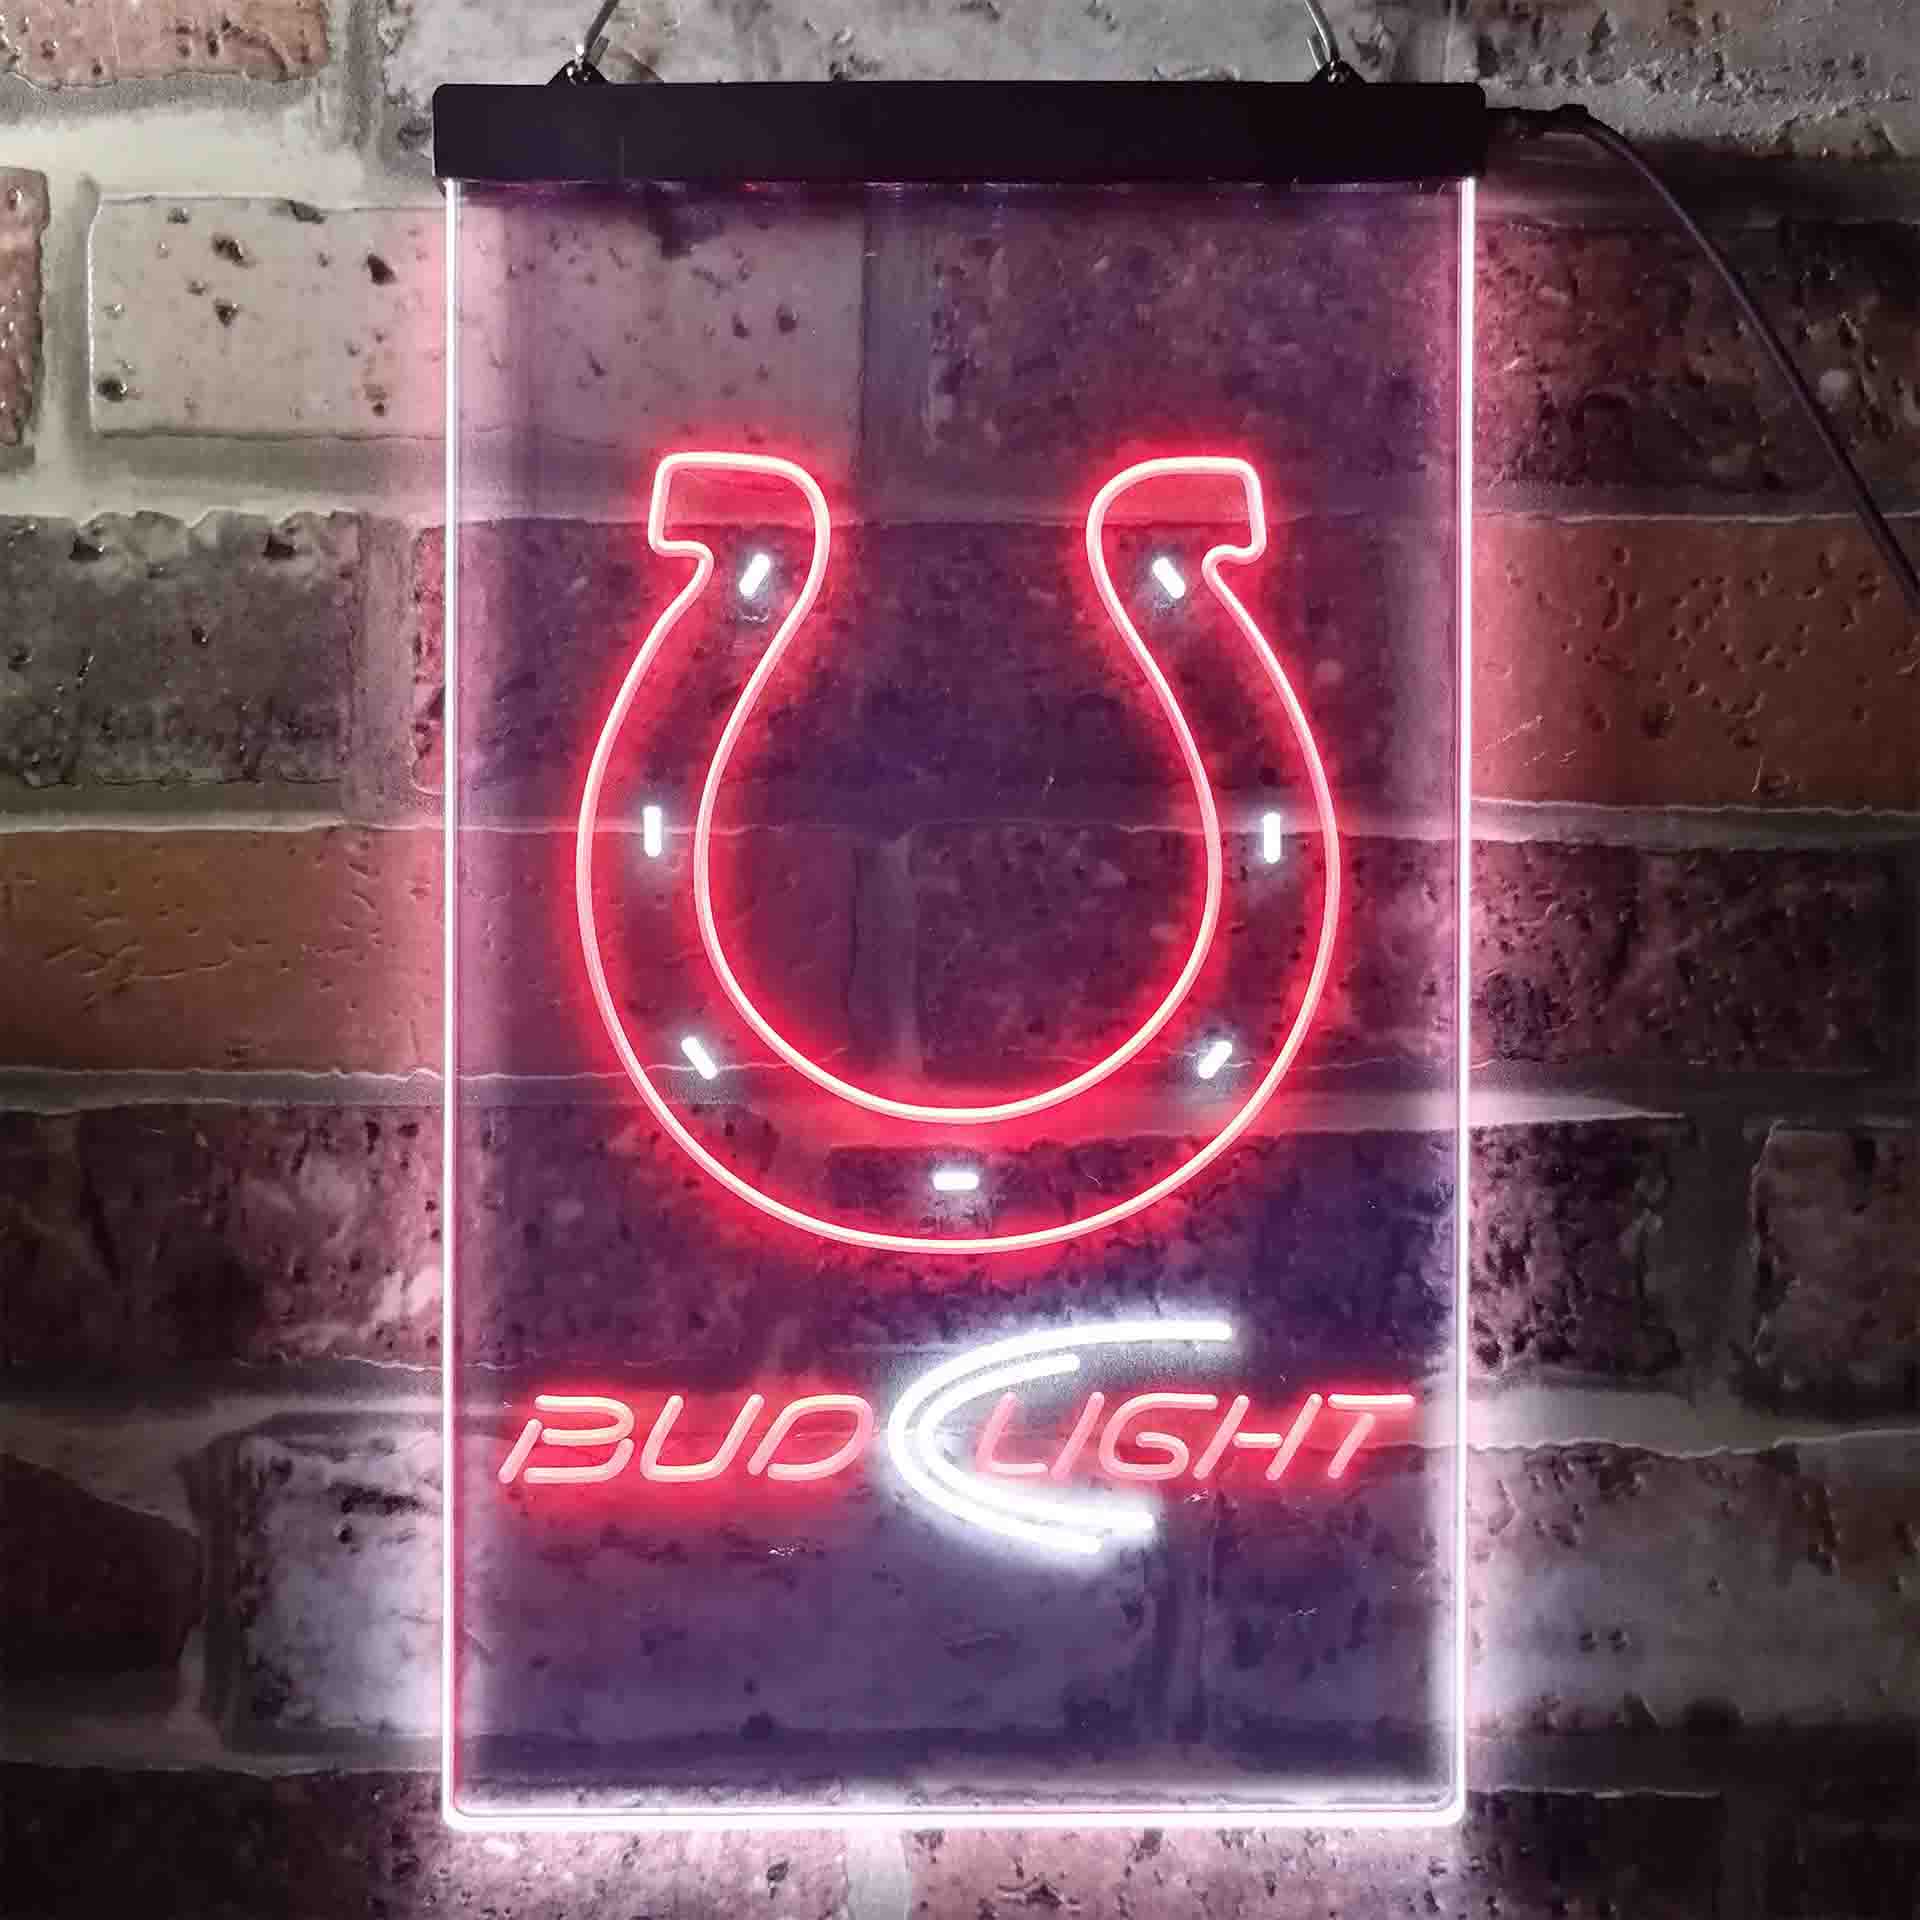 Indianapolis Colts Bud Light LED Neon Sign